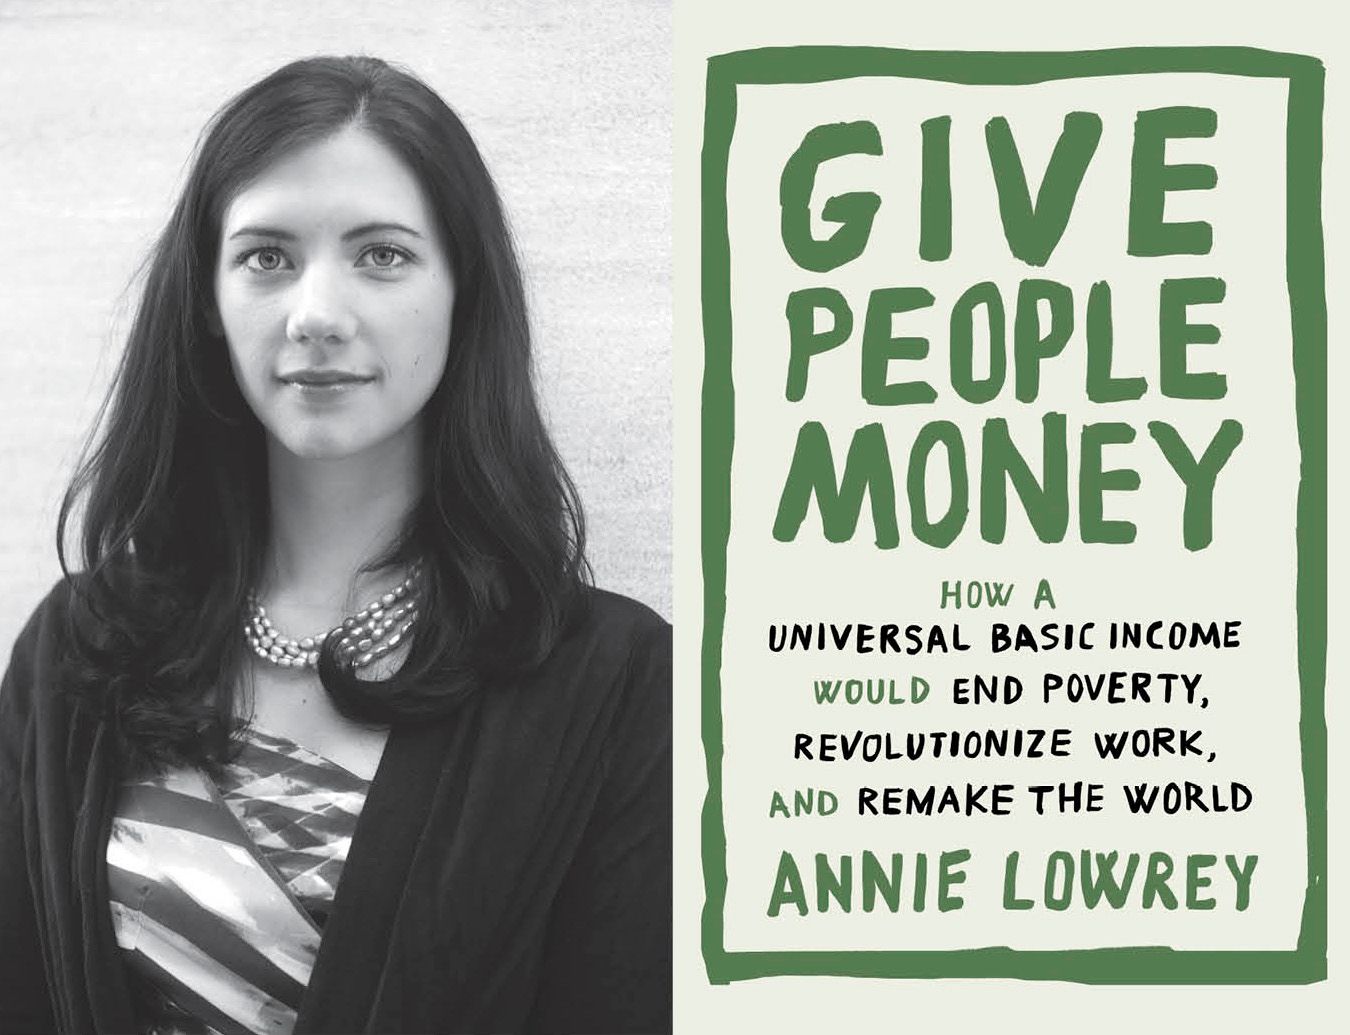 "Give People Money: How A Universal Basic Income Would End Poverty, Revolutionize Work, and Remake The World" by Annie Lowrey